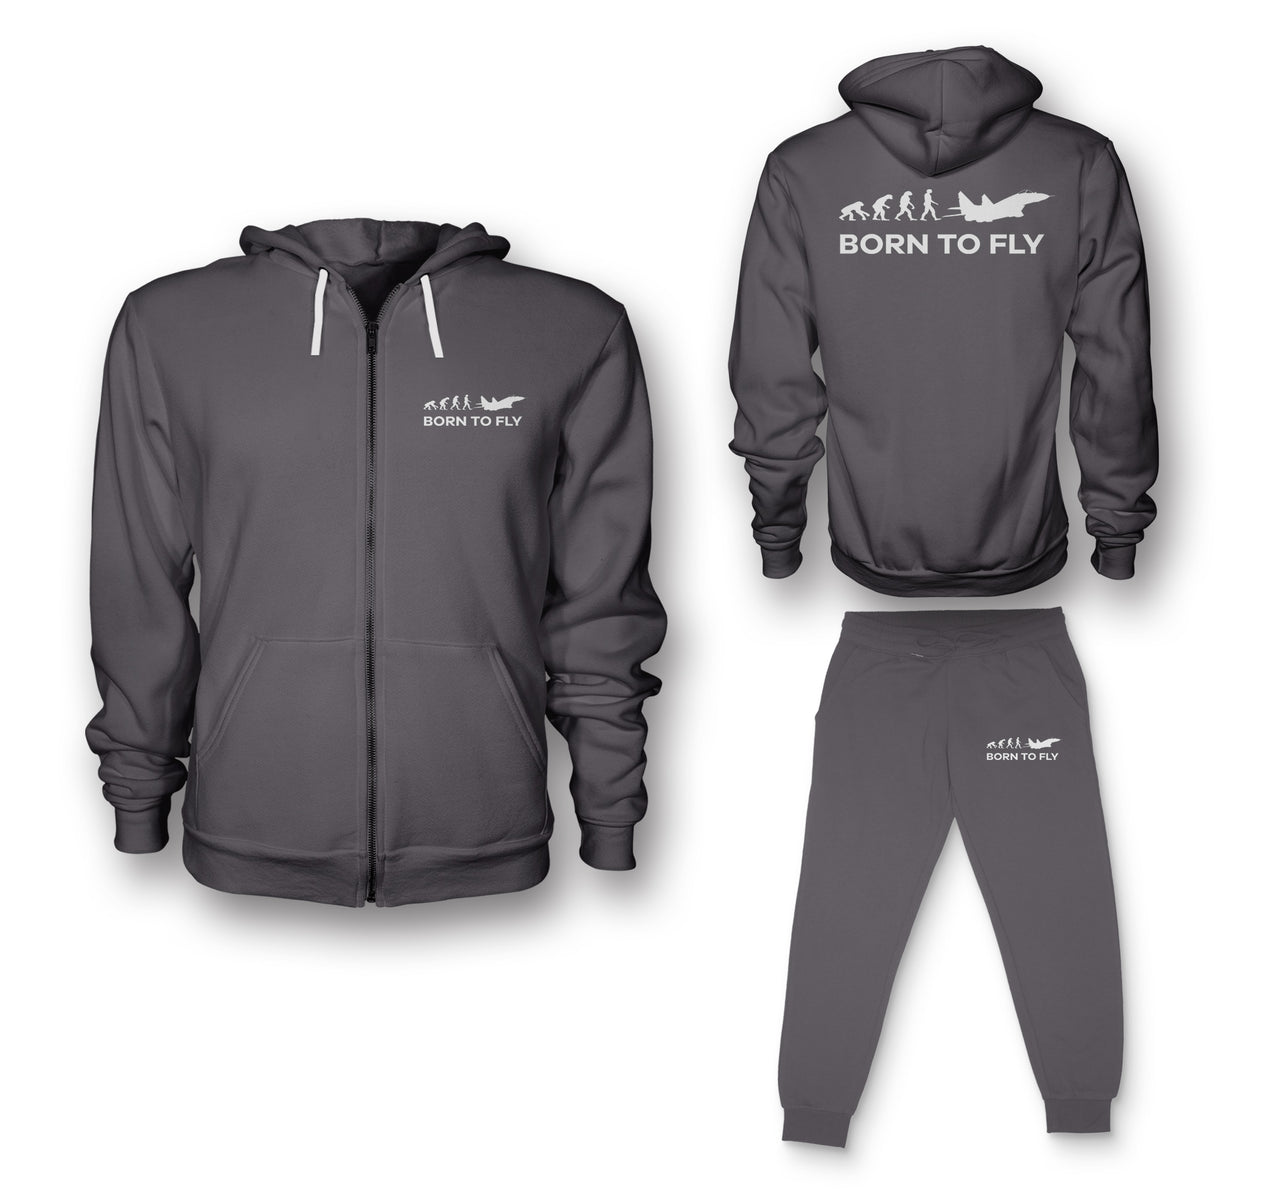 Born To Fly Military Designed Zipped Hoodies & Sweatpants Set